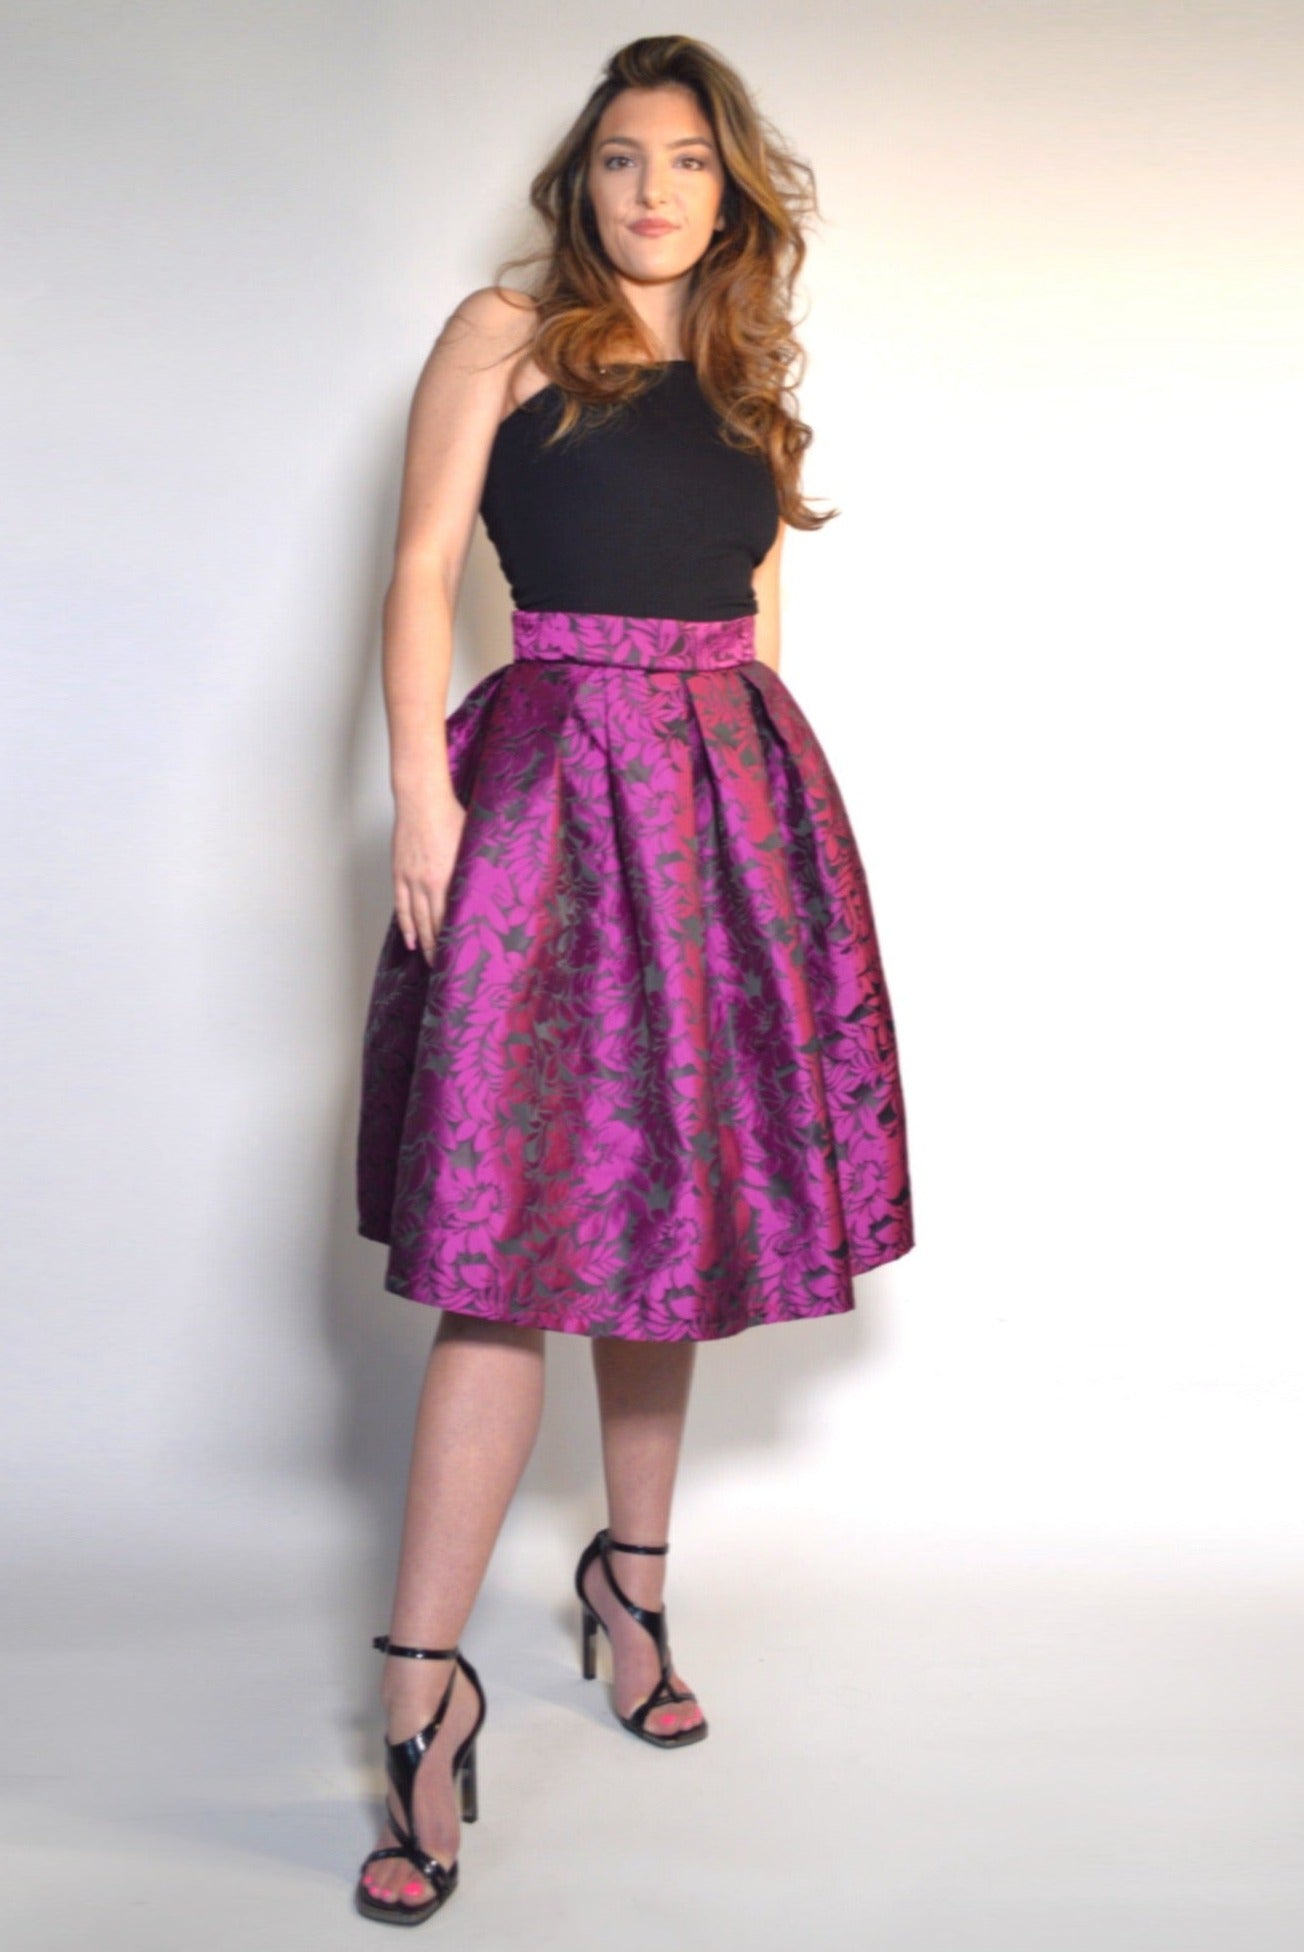 Box pleated skirt with pockets